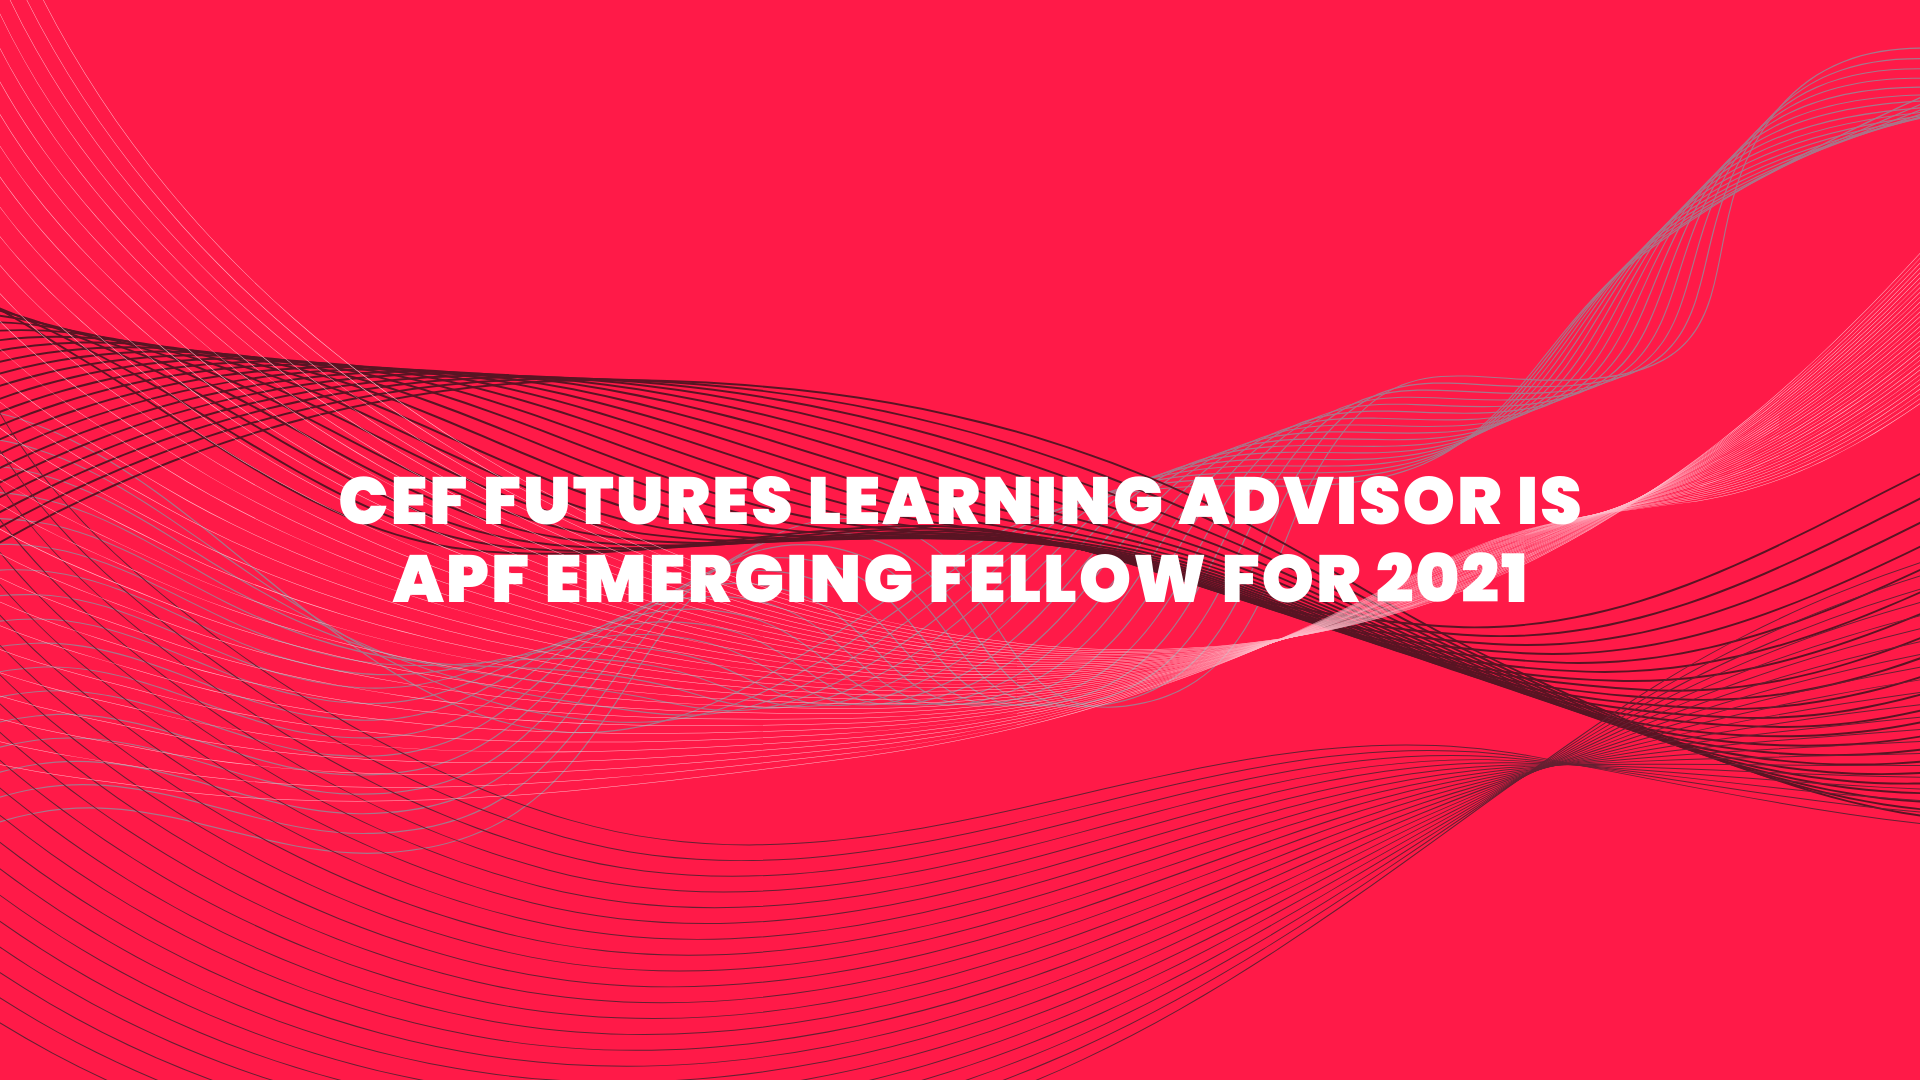 CEF Futures Learning Advisor is APF Emerging Fellow for 2021